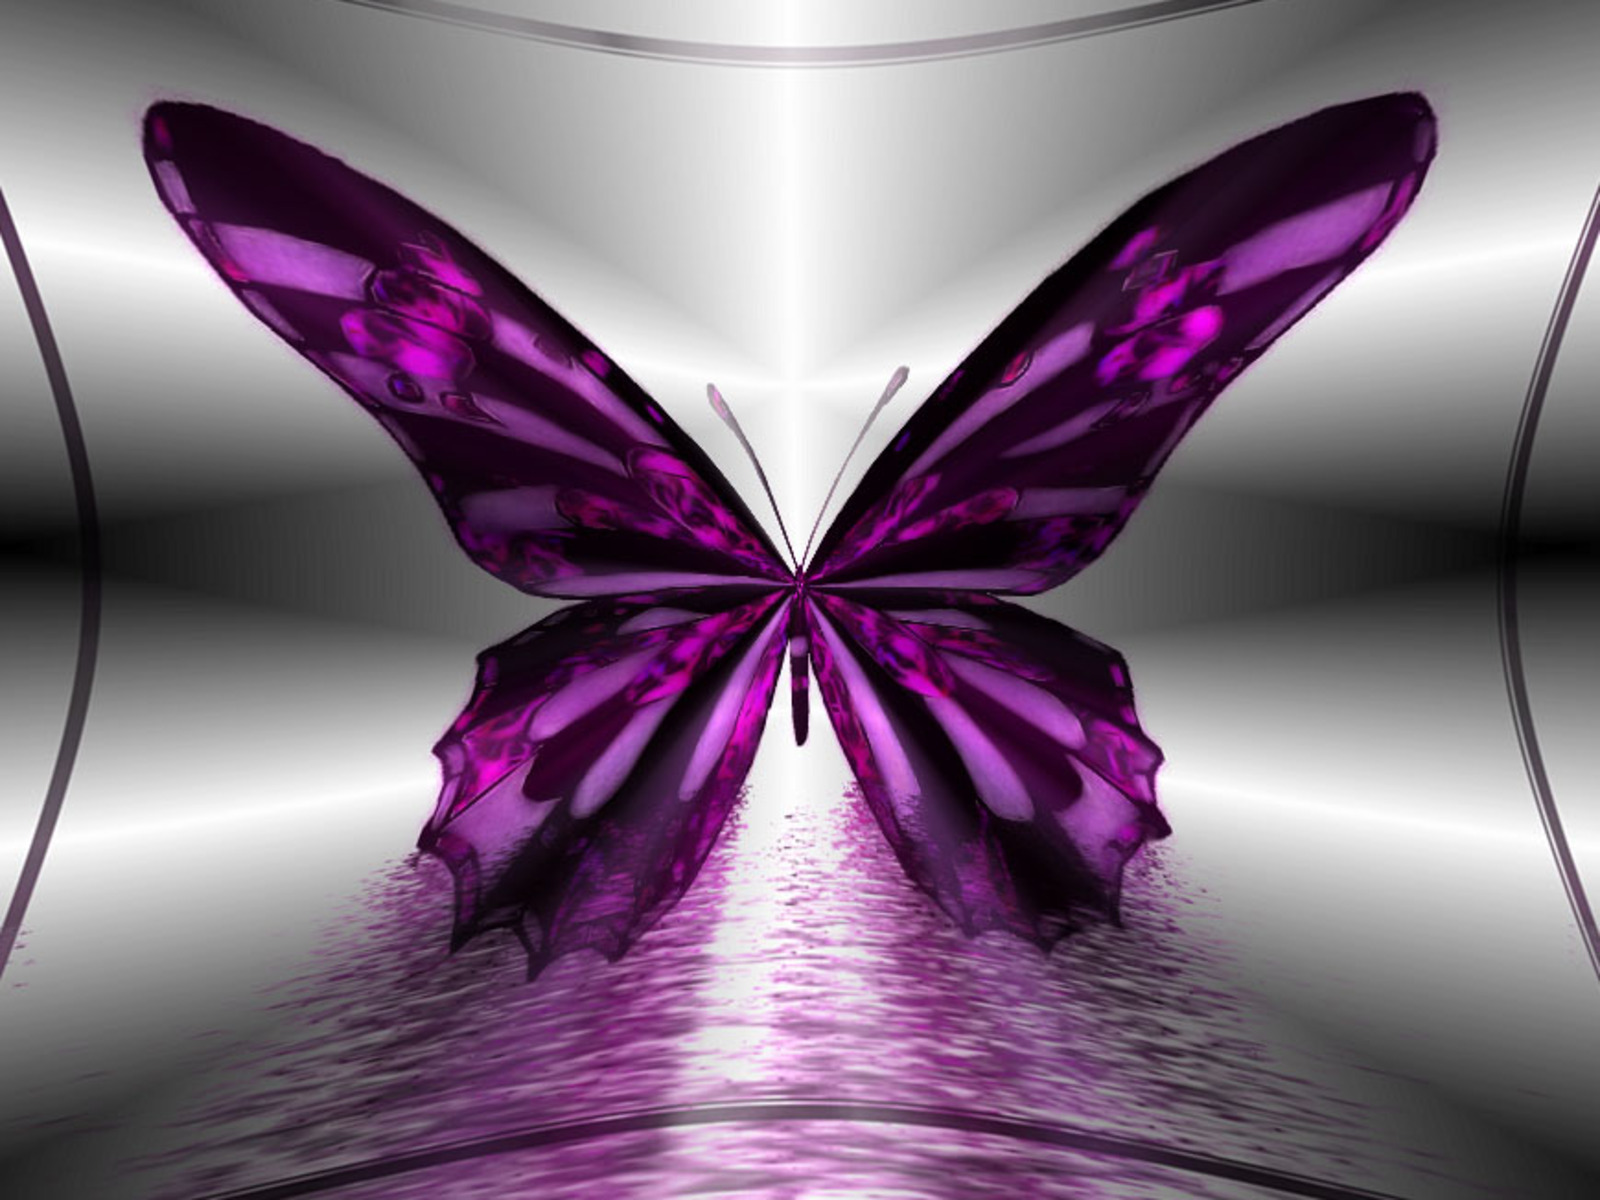 [49+] Free Butterfly Wallpaper for Computer on WallpaperSafari